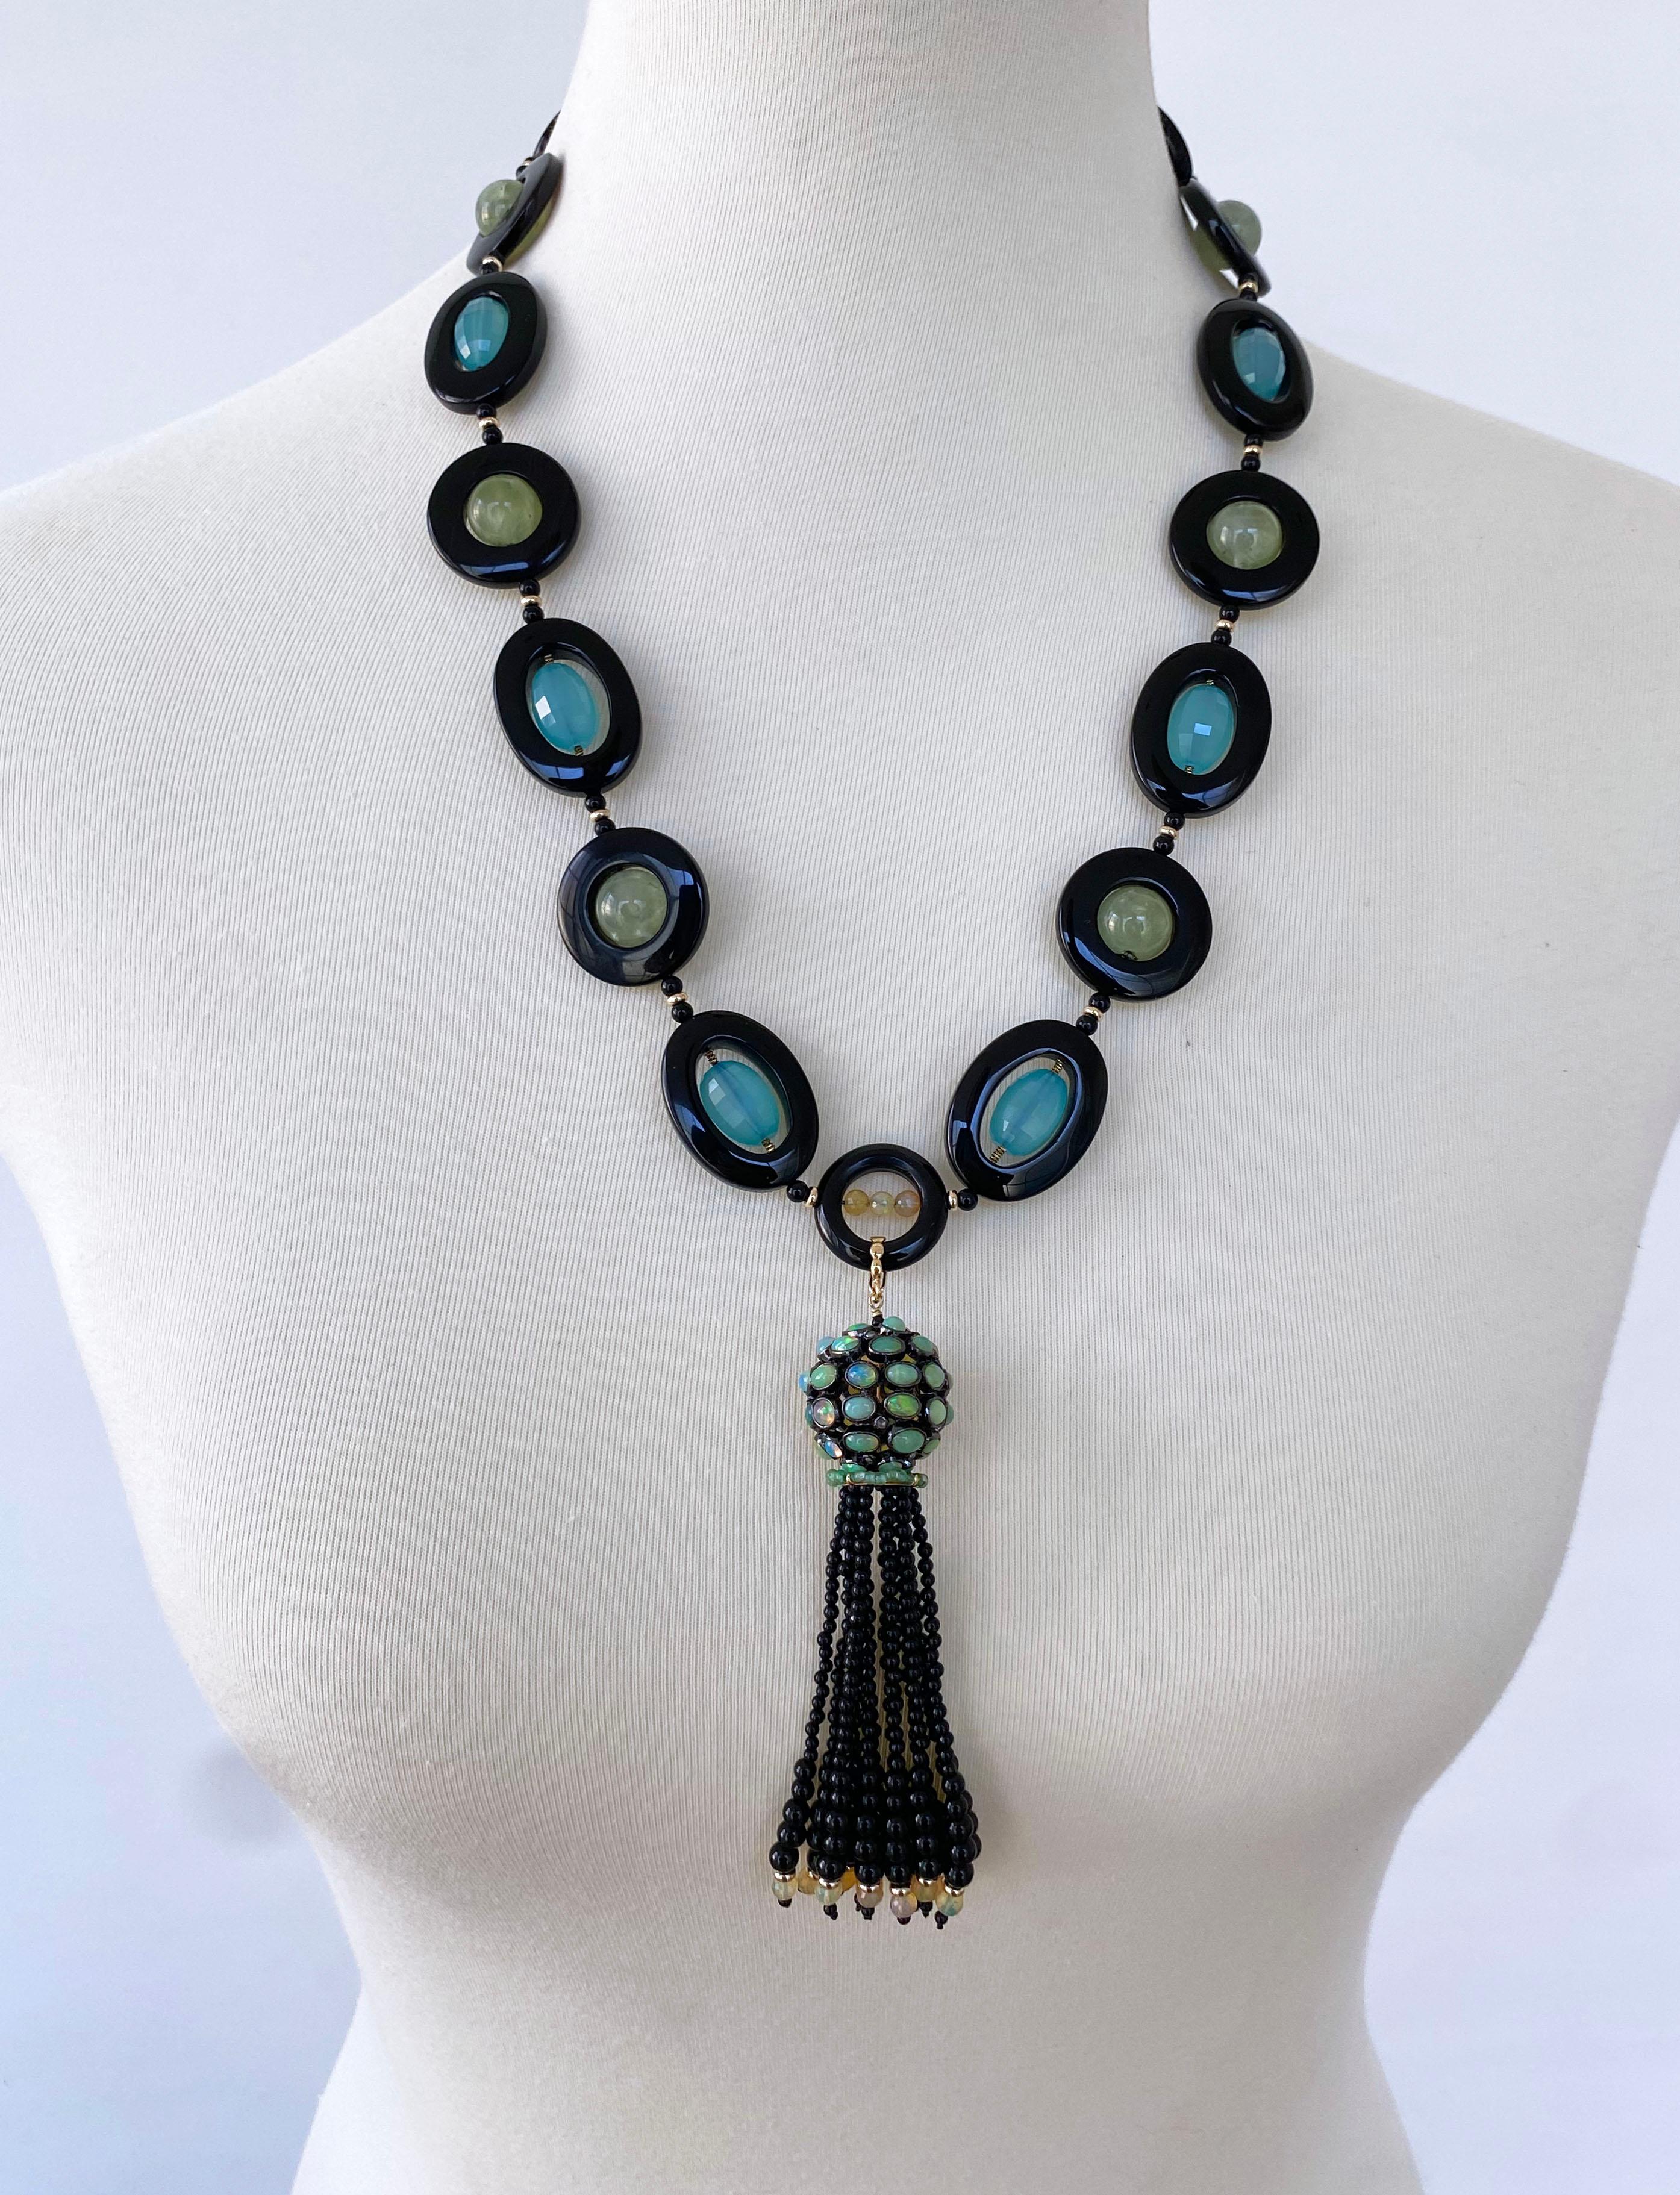 Stunning One of A Kind piece by Marina J.
This Necklace is made using Blue Chalcedony, Green Amethyst & Black Onyx 